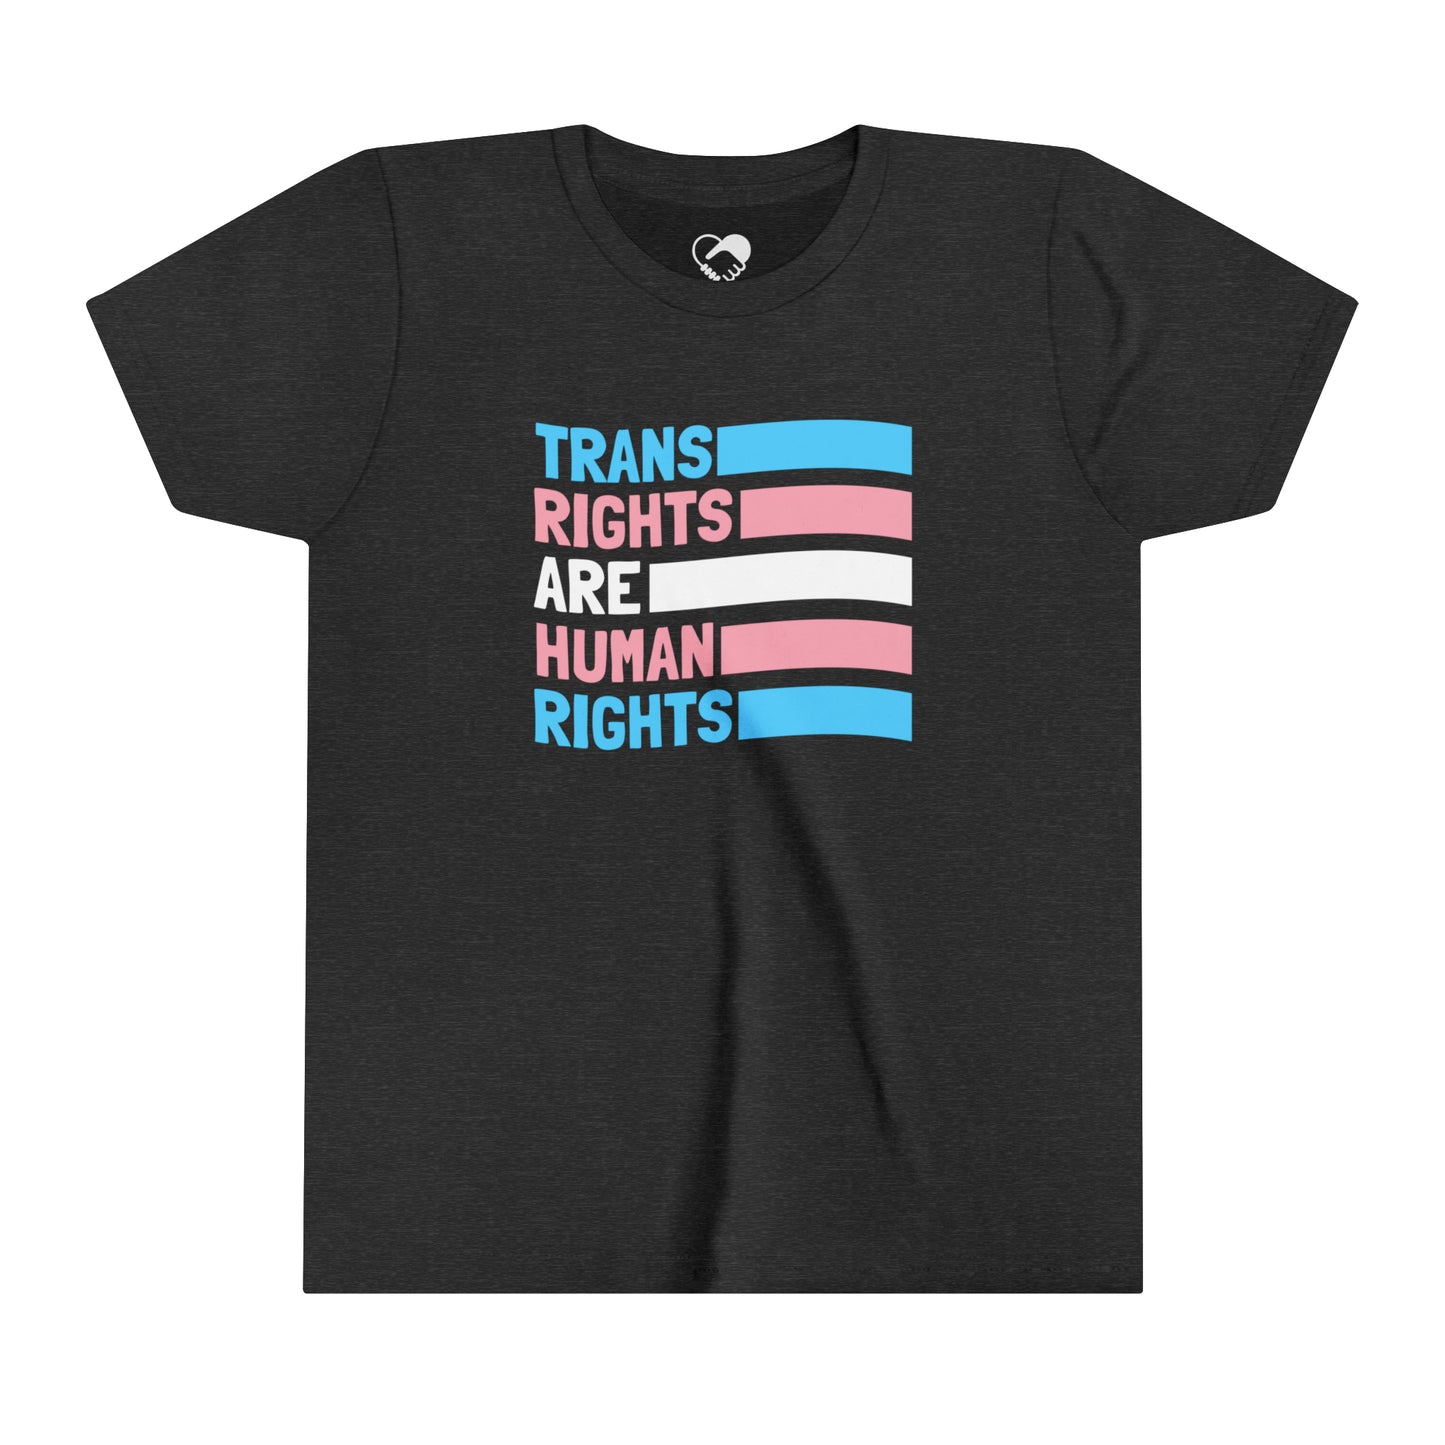 “Trans Rights Are Human Rights” Youth T-Shirt